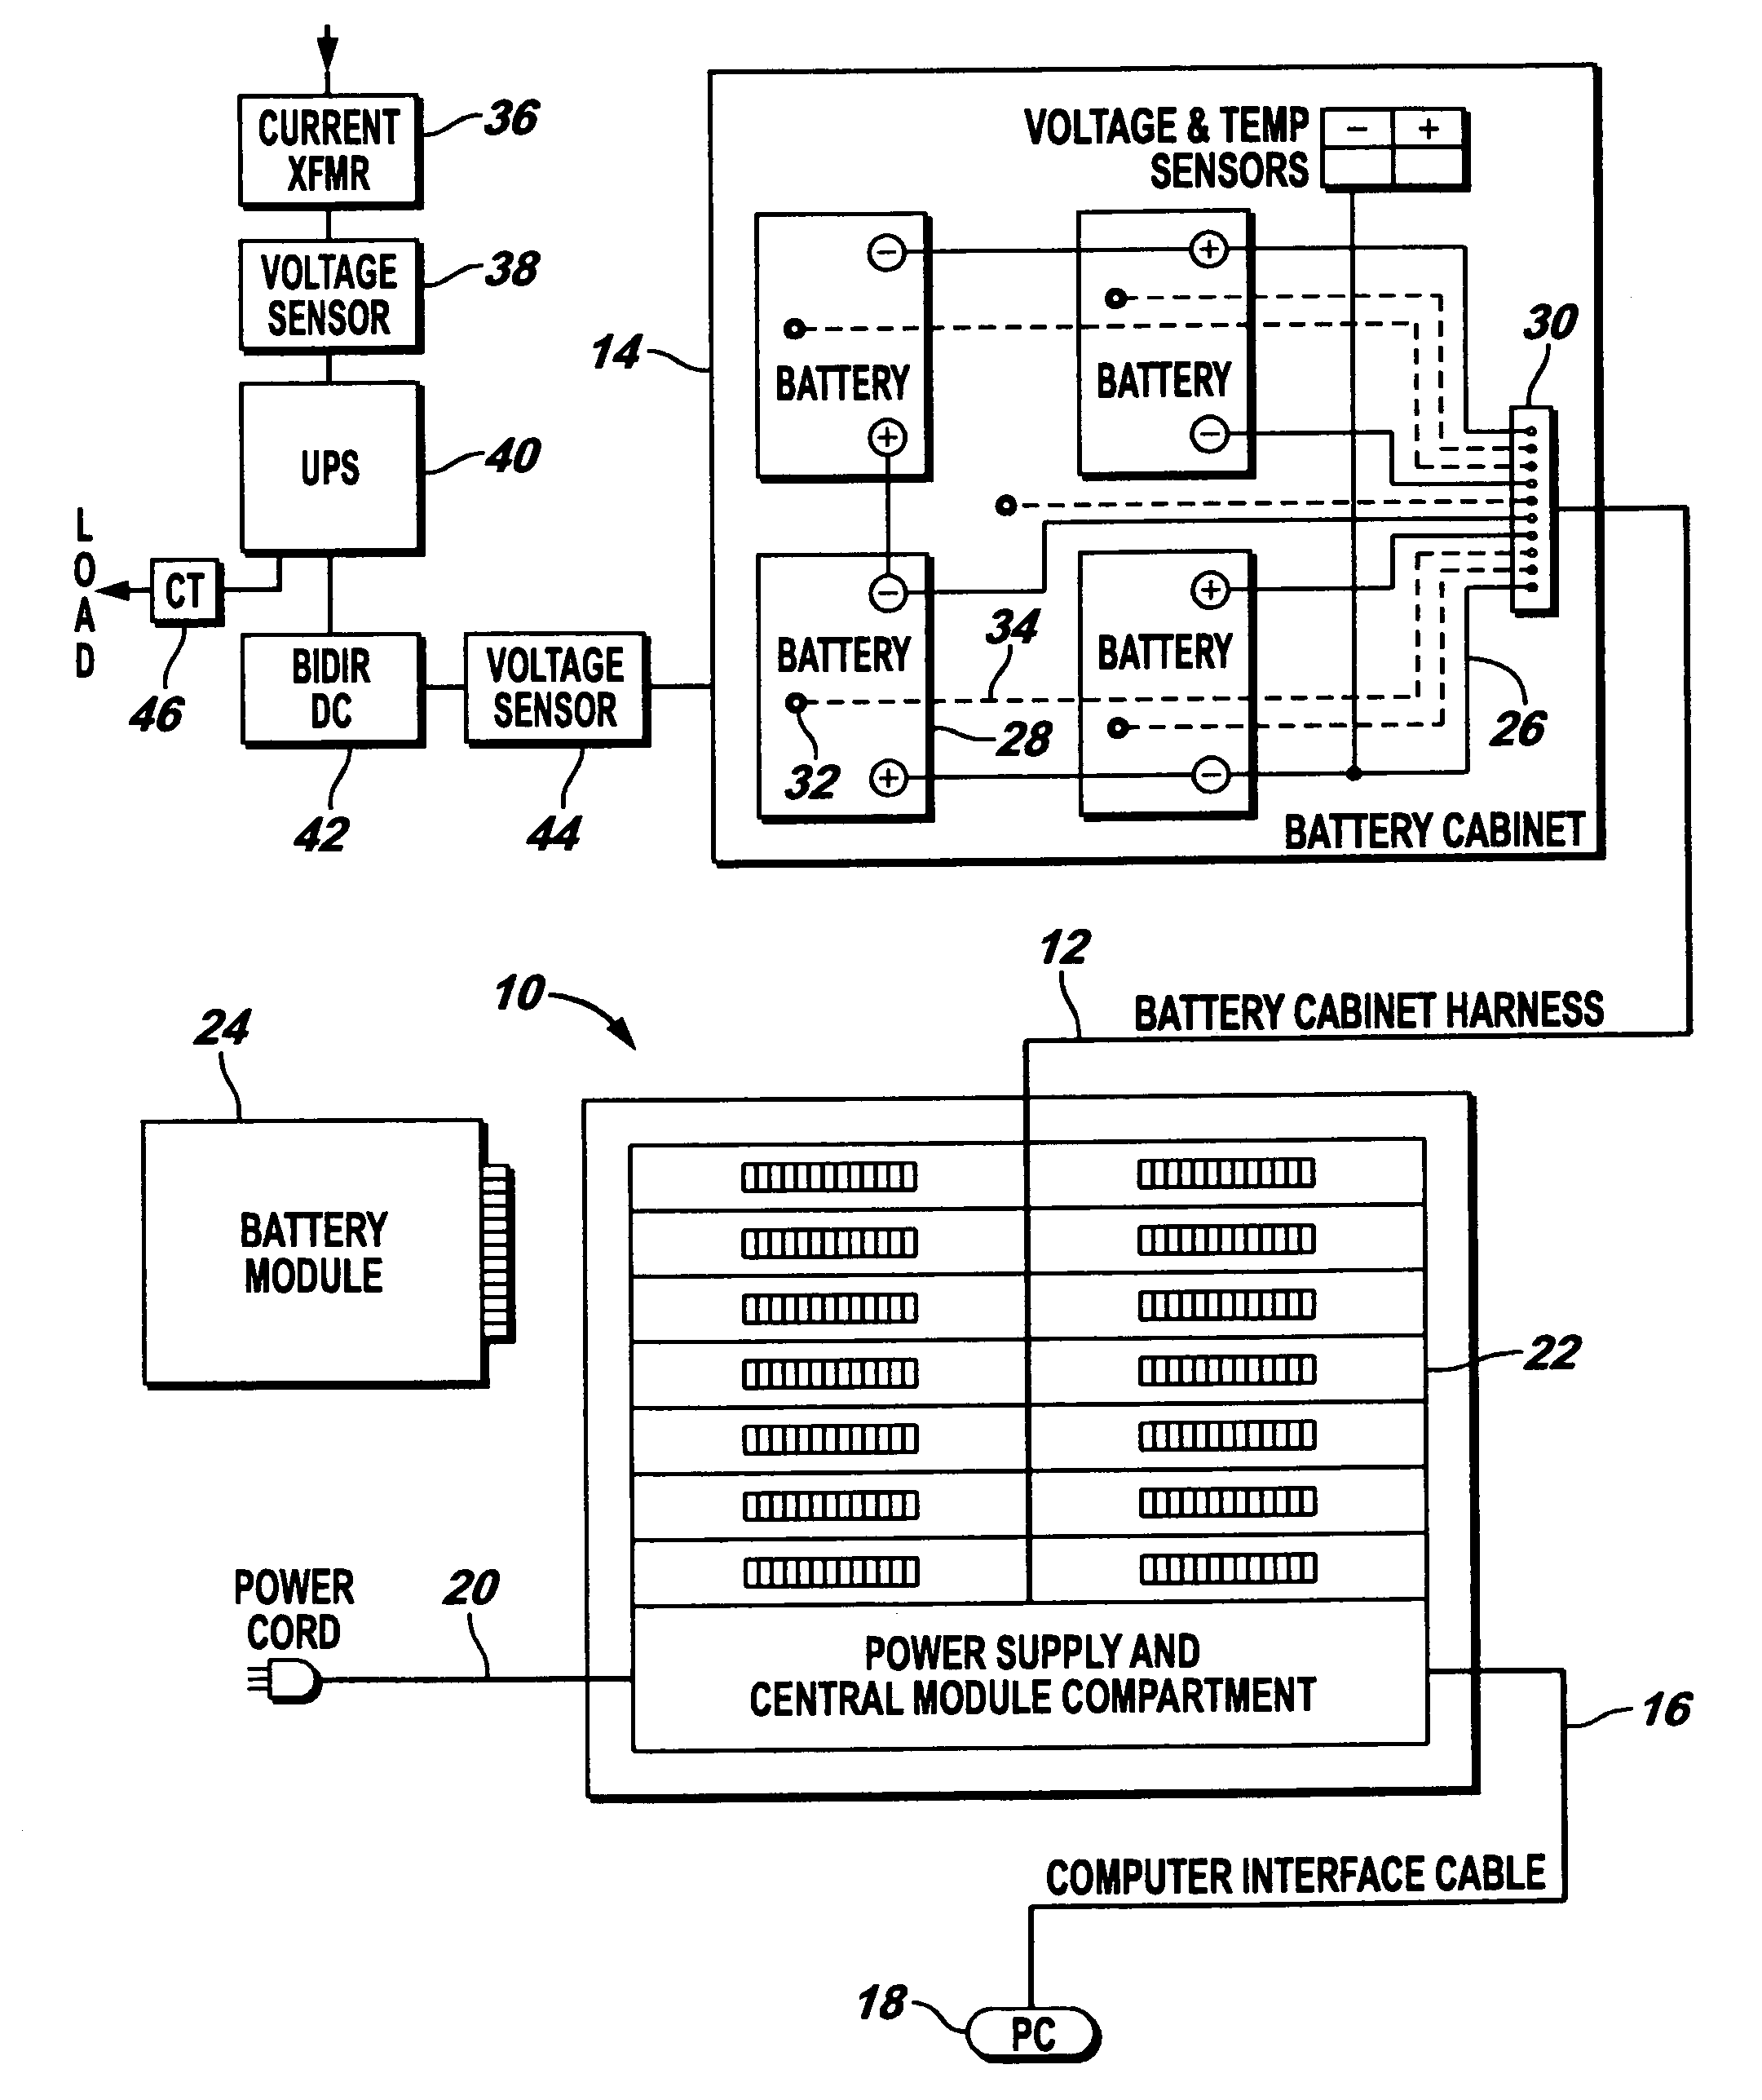 Method and system for monitoring power supplies